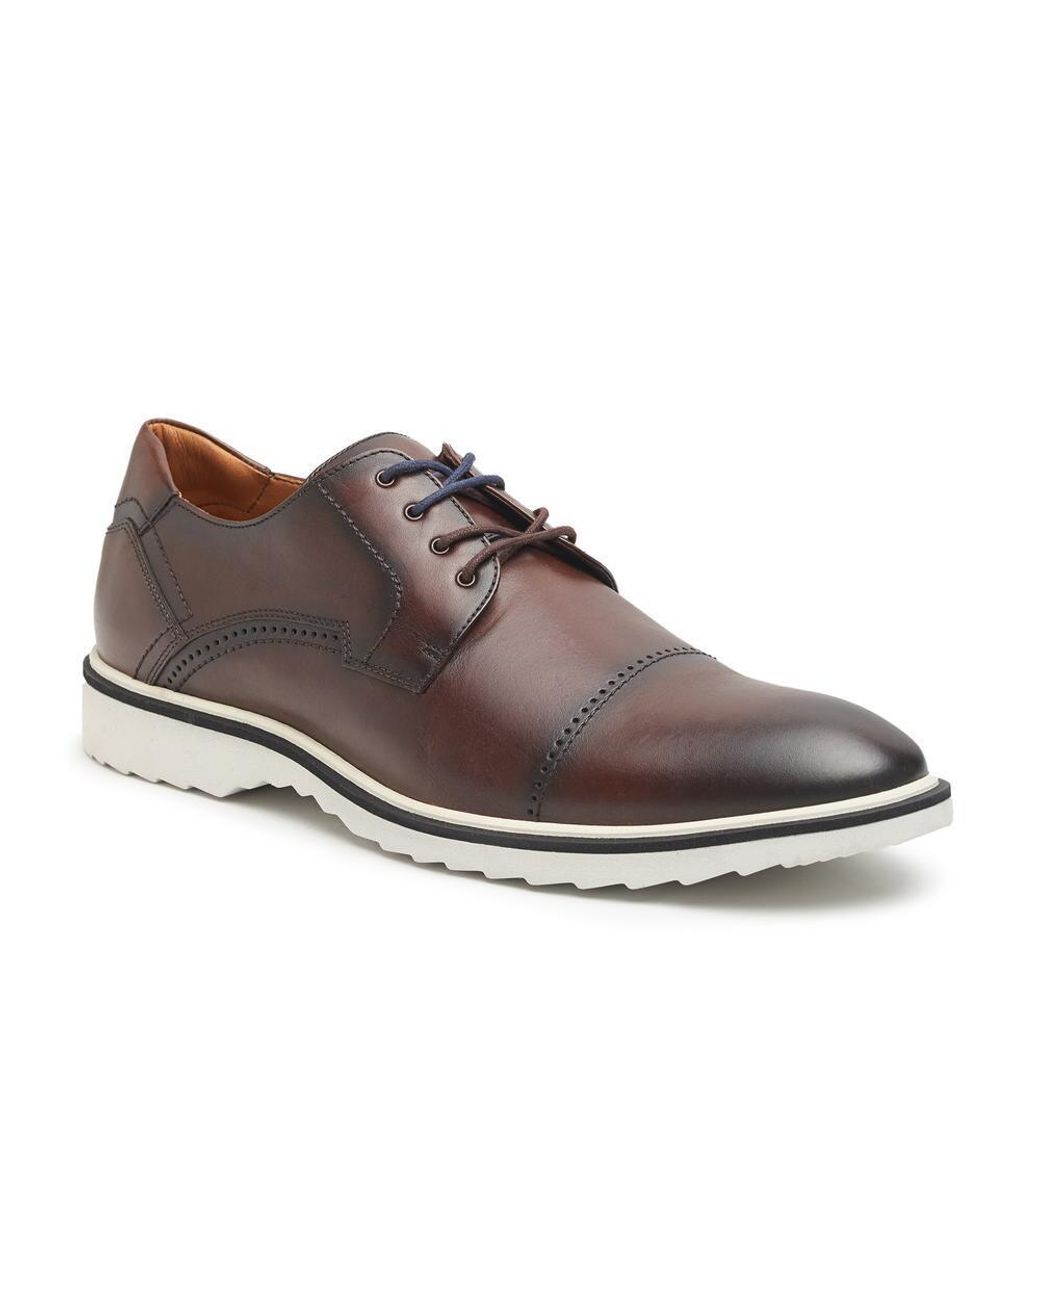 G.H. Bass & Co. Leather Men's Maine Lace Up Shoe in Brown for Men - Lyst